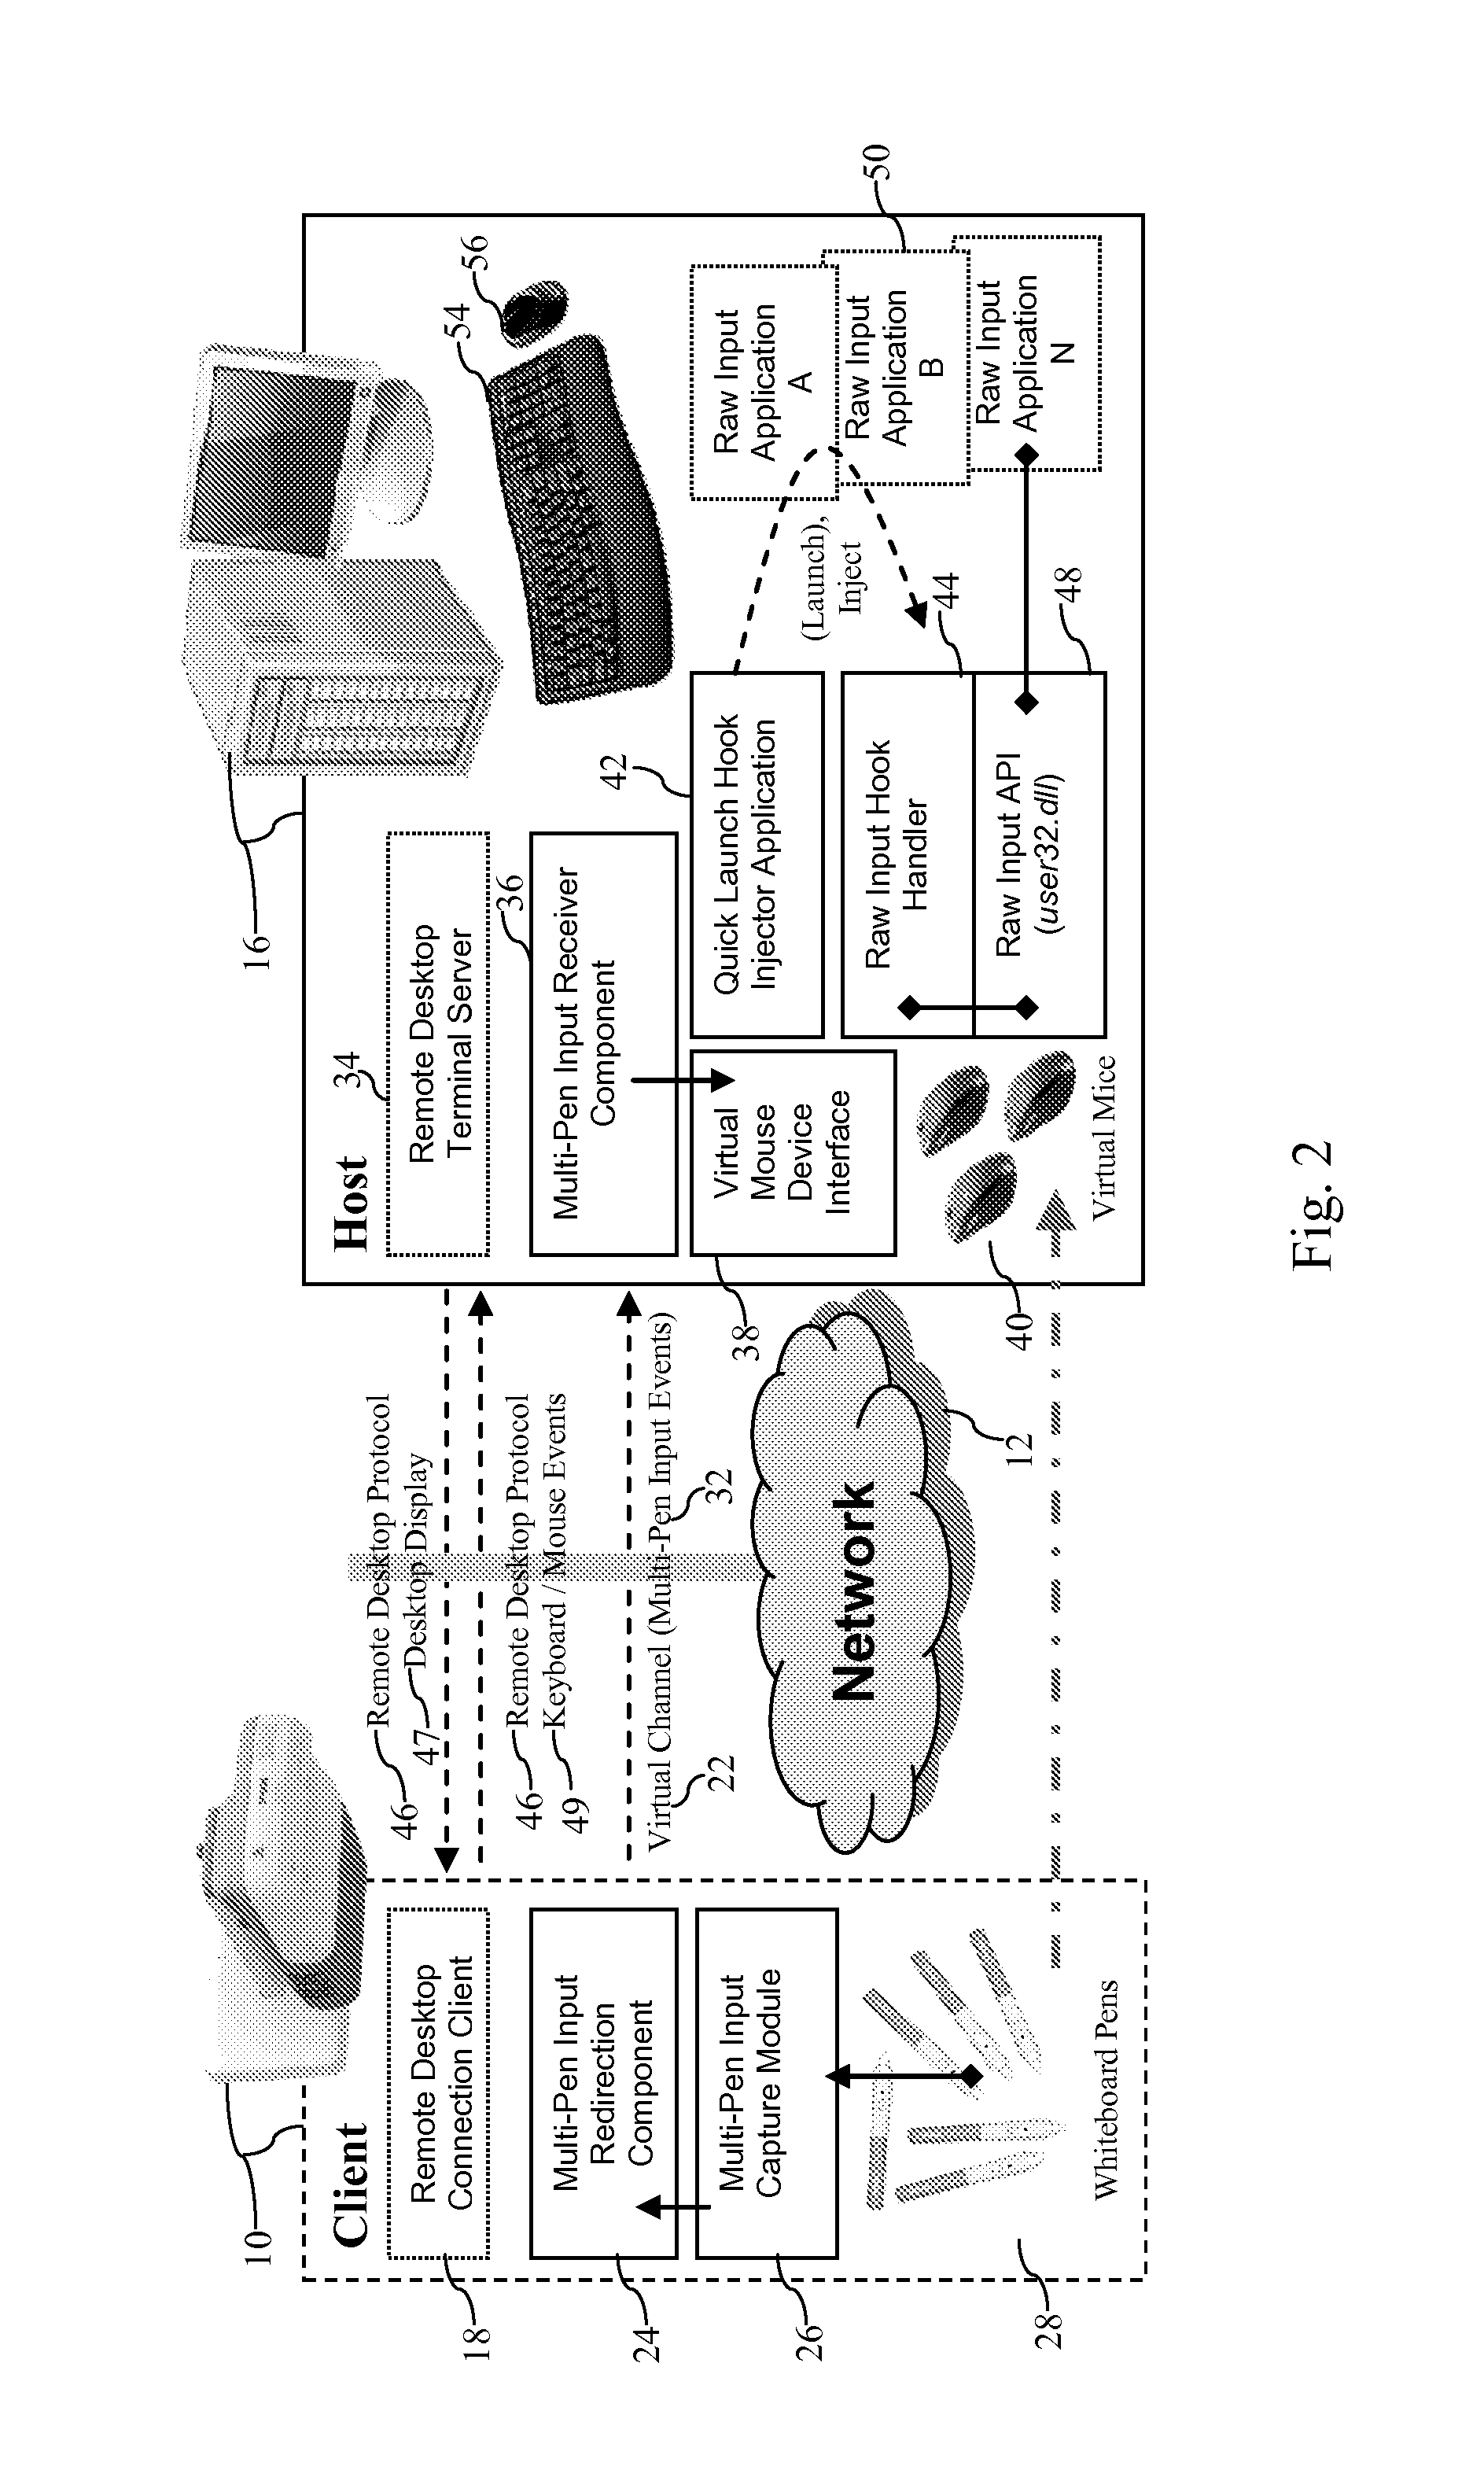 Method for Providing Multiple Mouse Inputs in a Remote Desktop Session